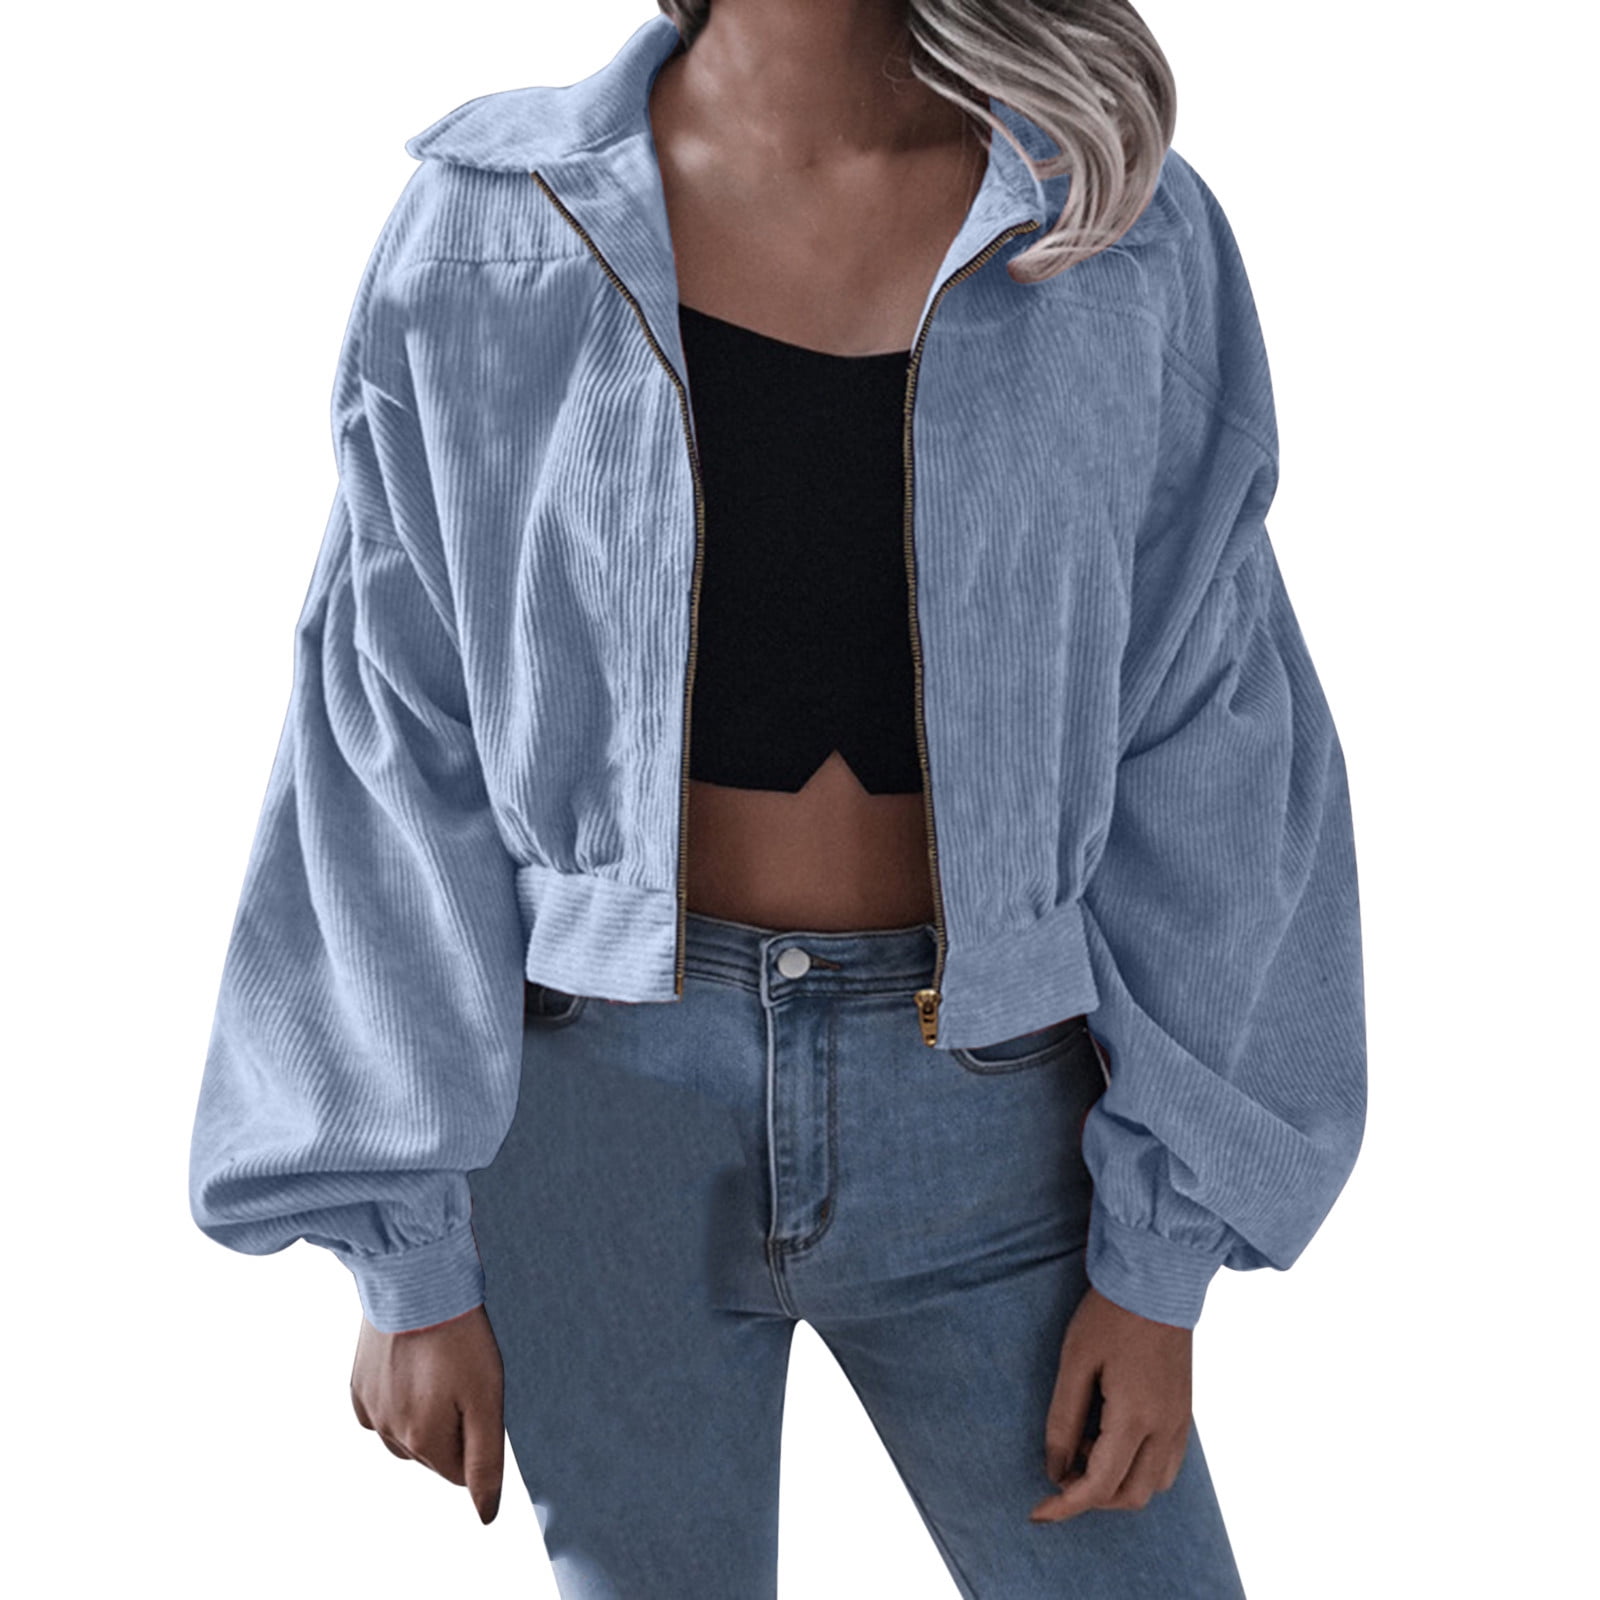 Blue Denim Jacket with Black Long Sleeve T-Shirt Casual Outfits